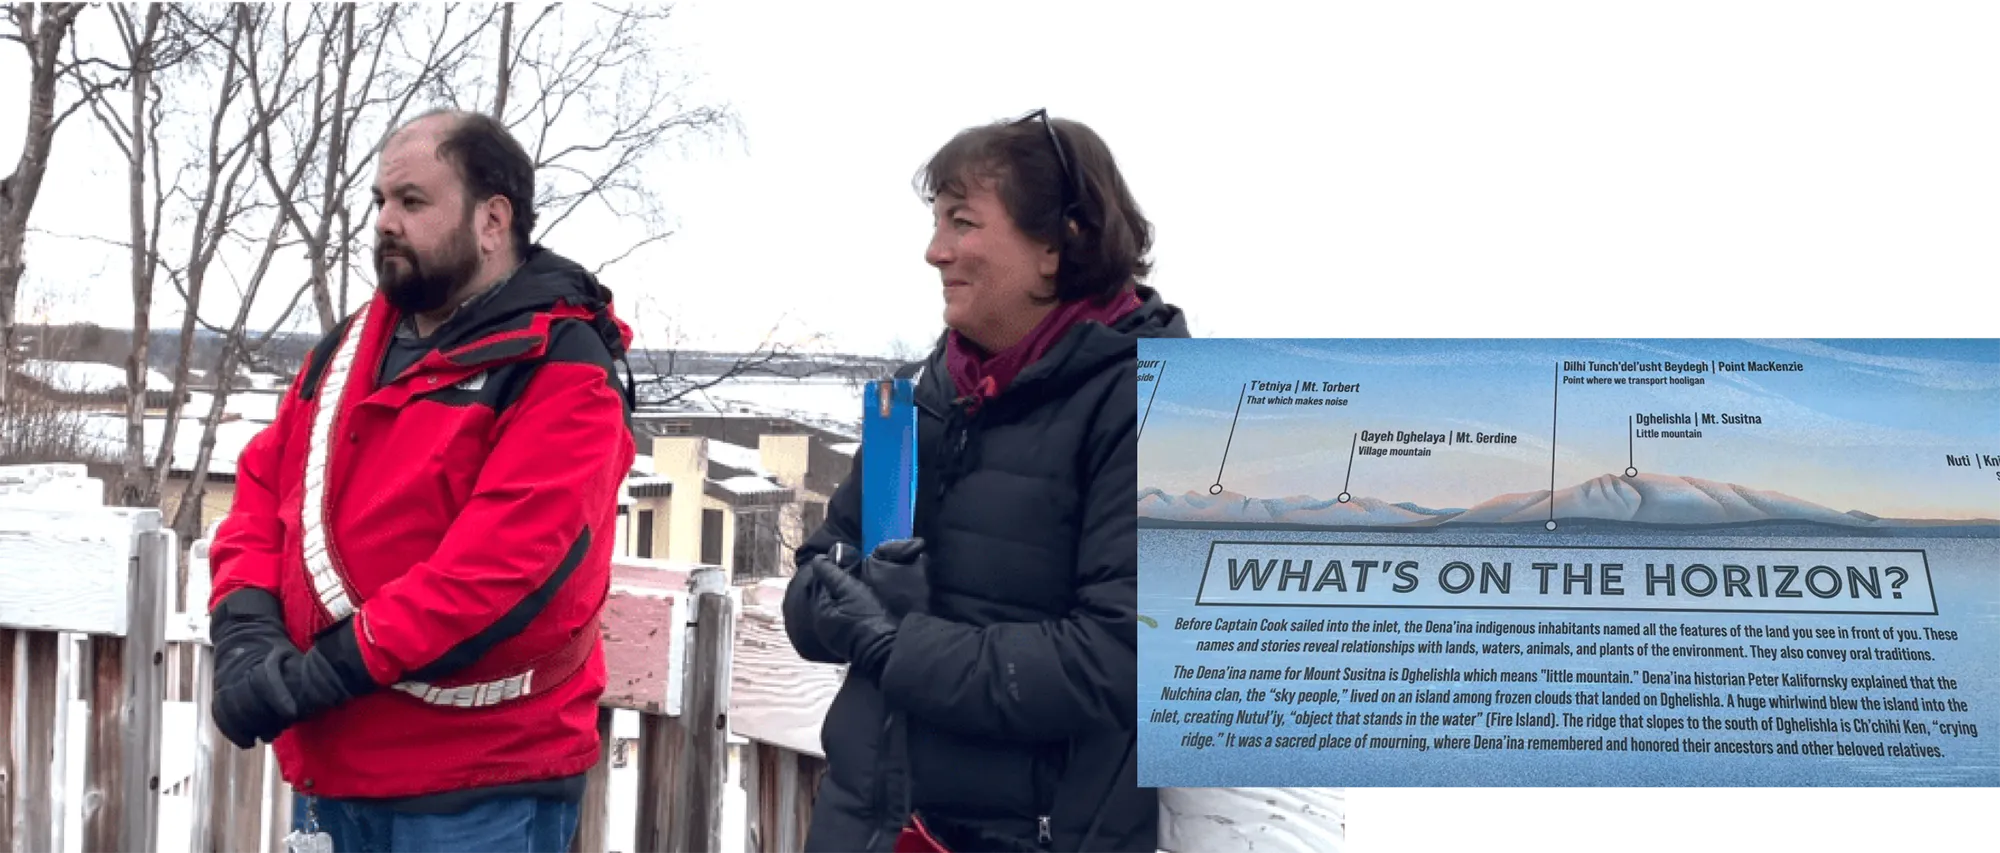 Aaron Leggett, Chief, Native Village of Eklutna, and Beth Nordland, Exec. Dir. Anchorage Parks Foundation, at the unveiling of a Dena’ina place names sign (right) at the Capt. Cook monument in Anchorage. 